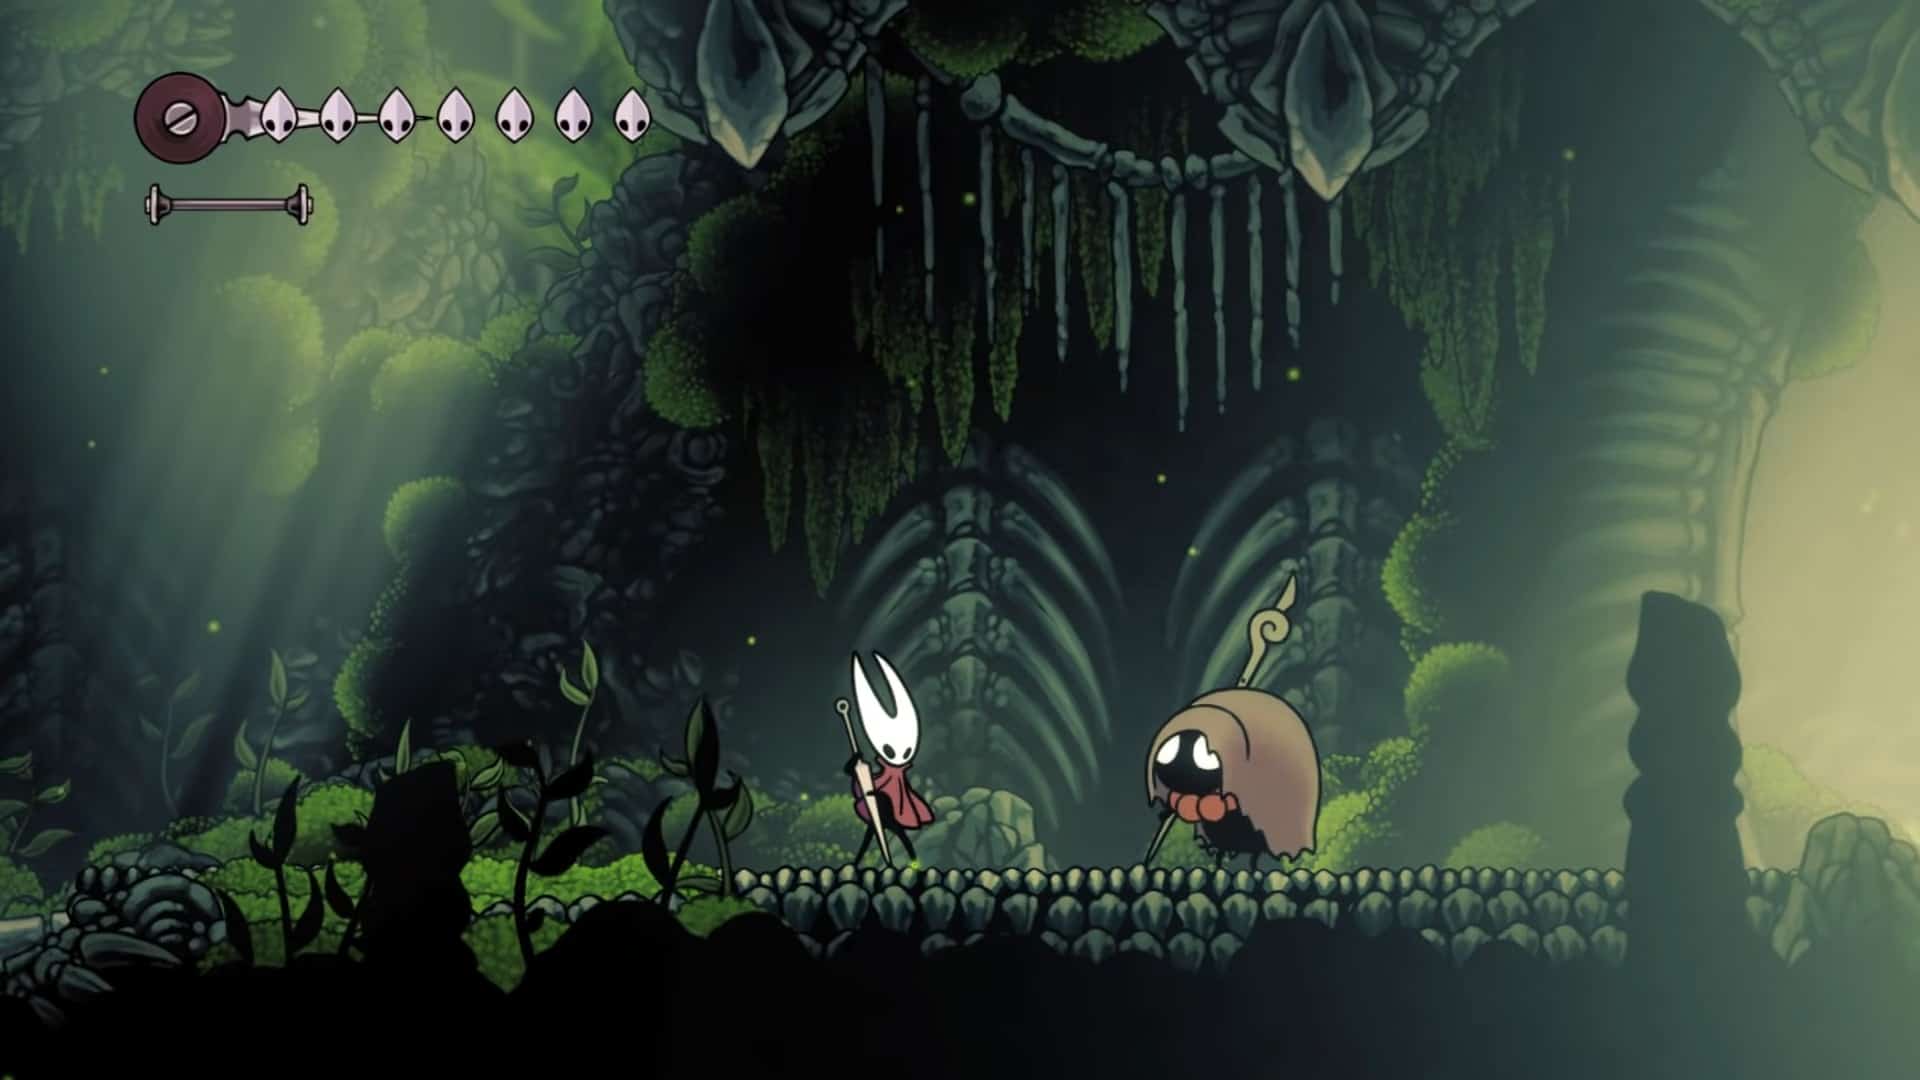 Hollow Knight Sequel Silksong Announced For Nintendo Switch - My Nintendo  News